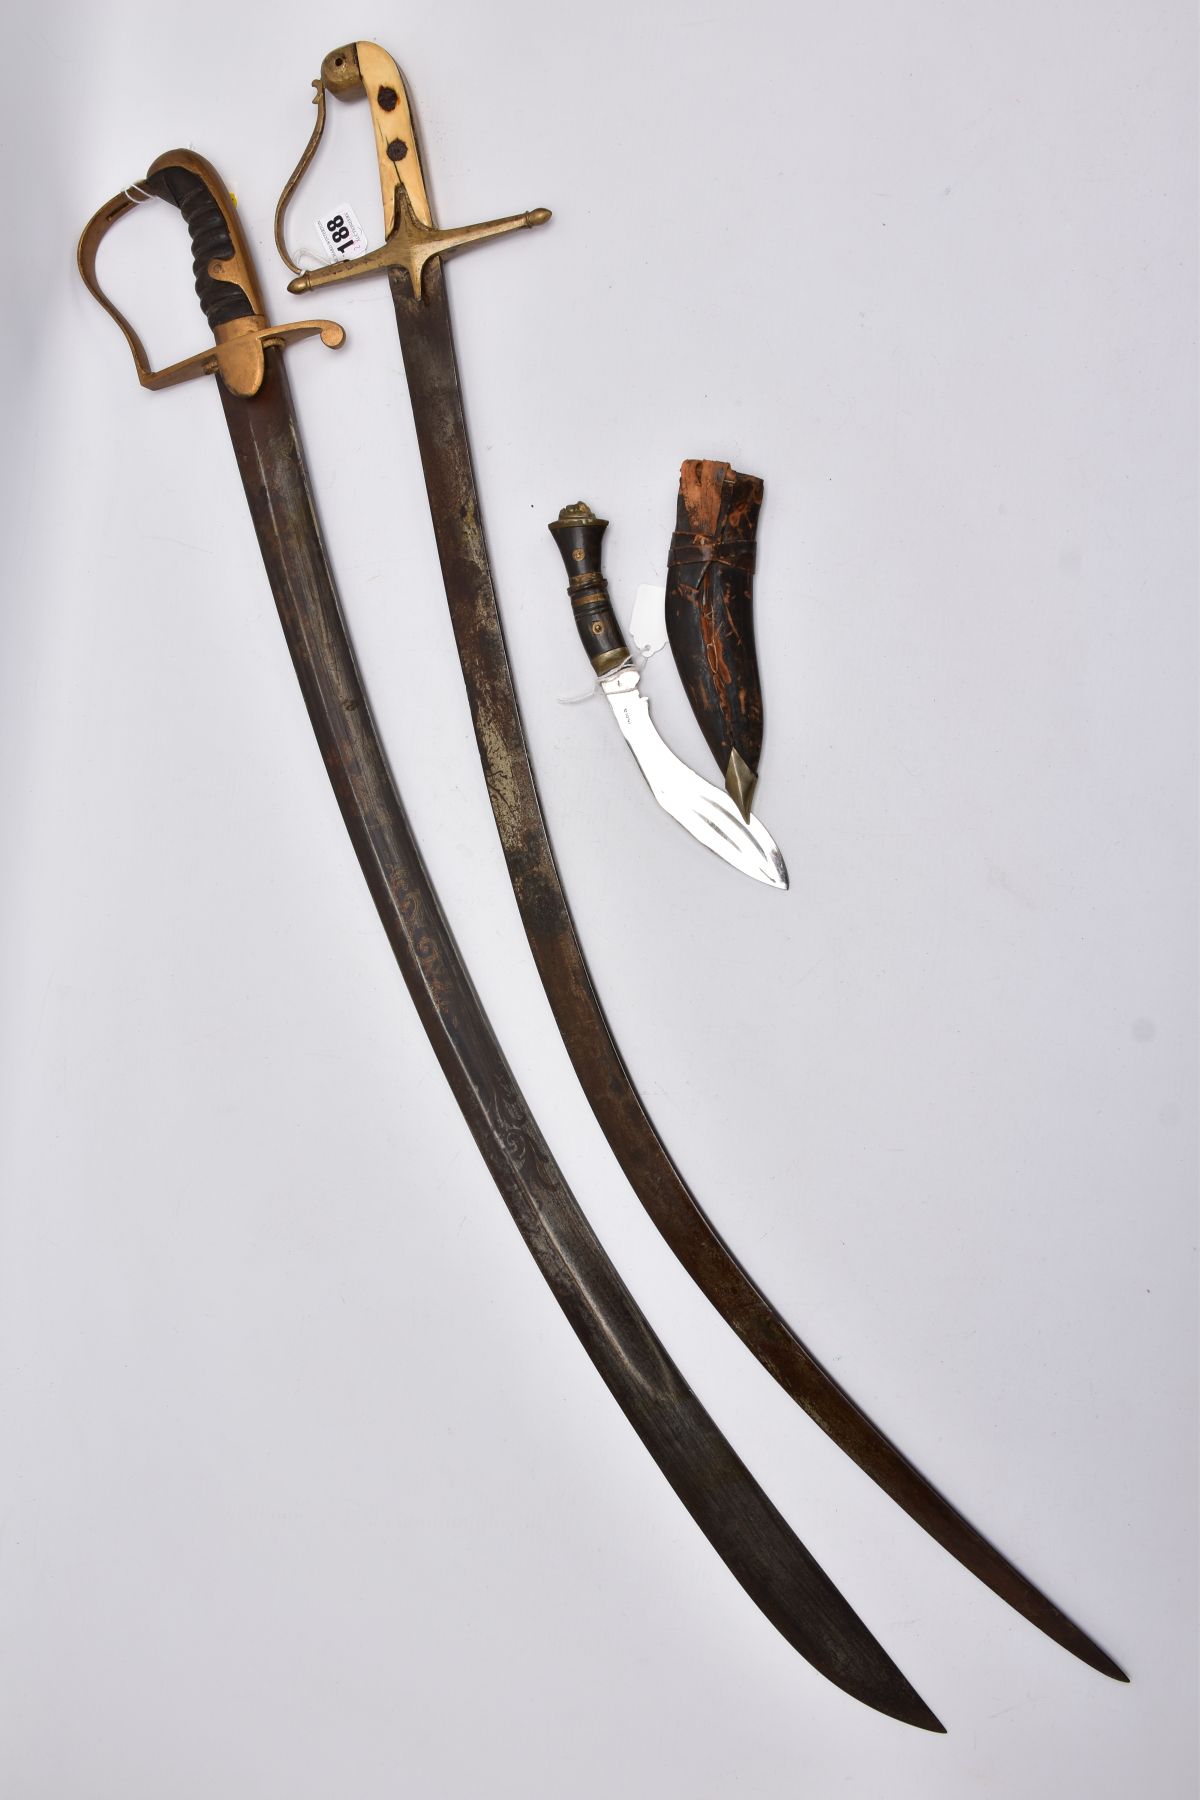 TWO LONG CURVED BLADE SWORDS, Eastern in design and looks, blade on one has been lacquered, etched - Image 7 of 10